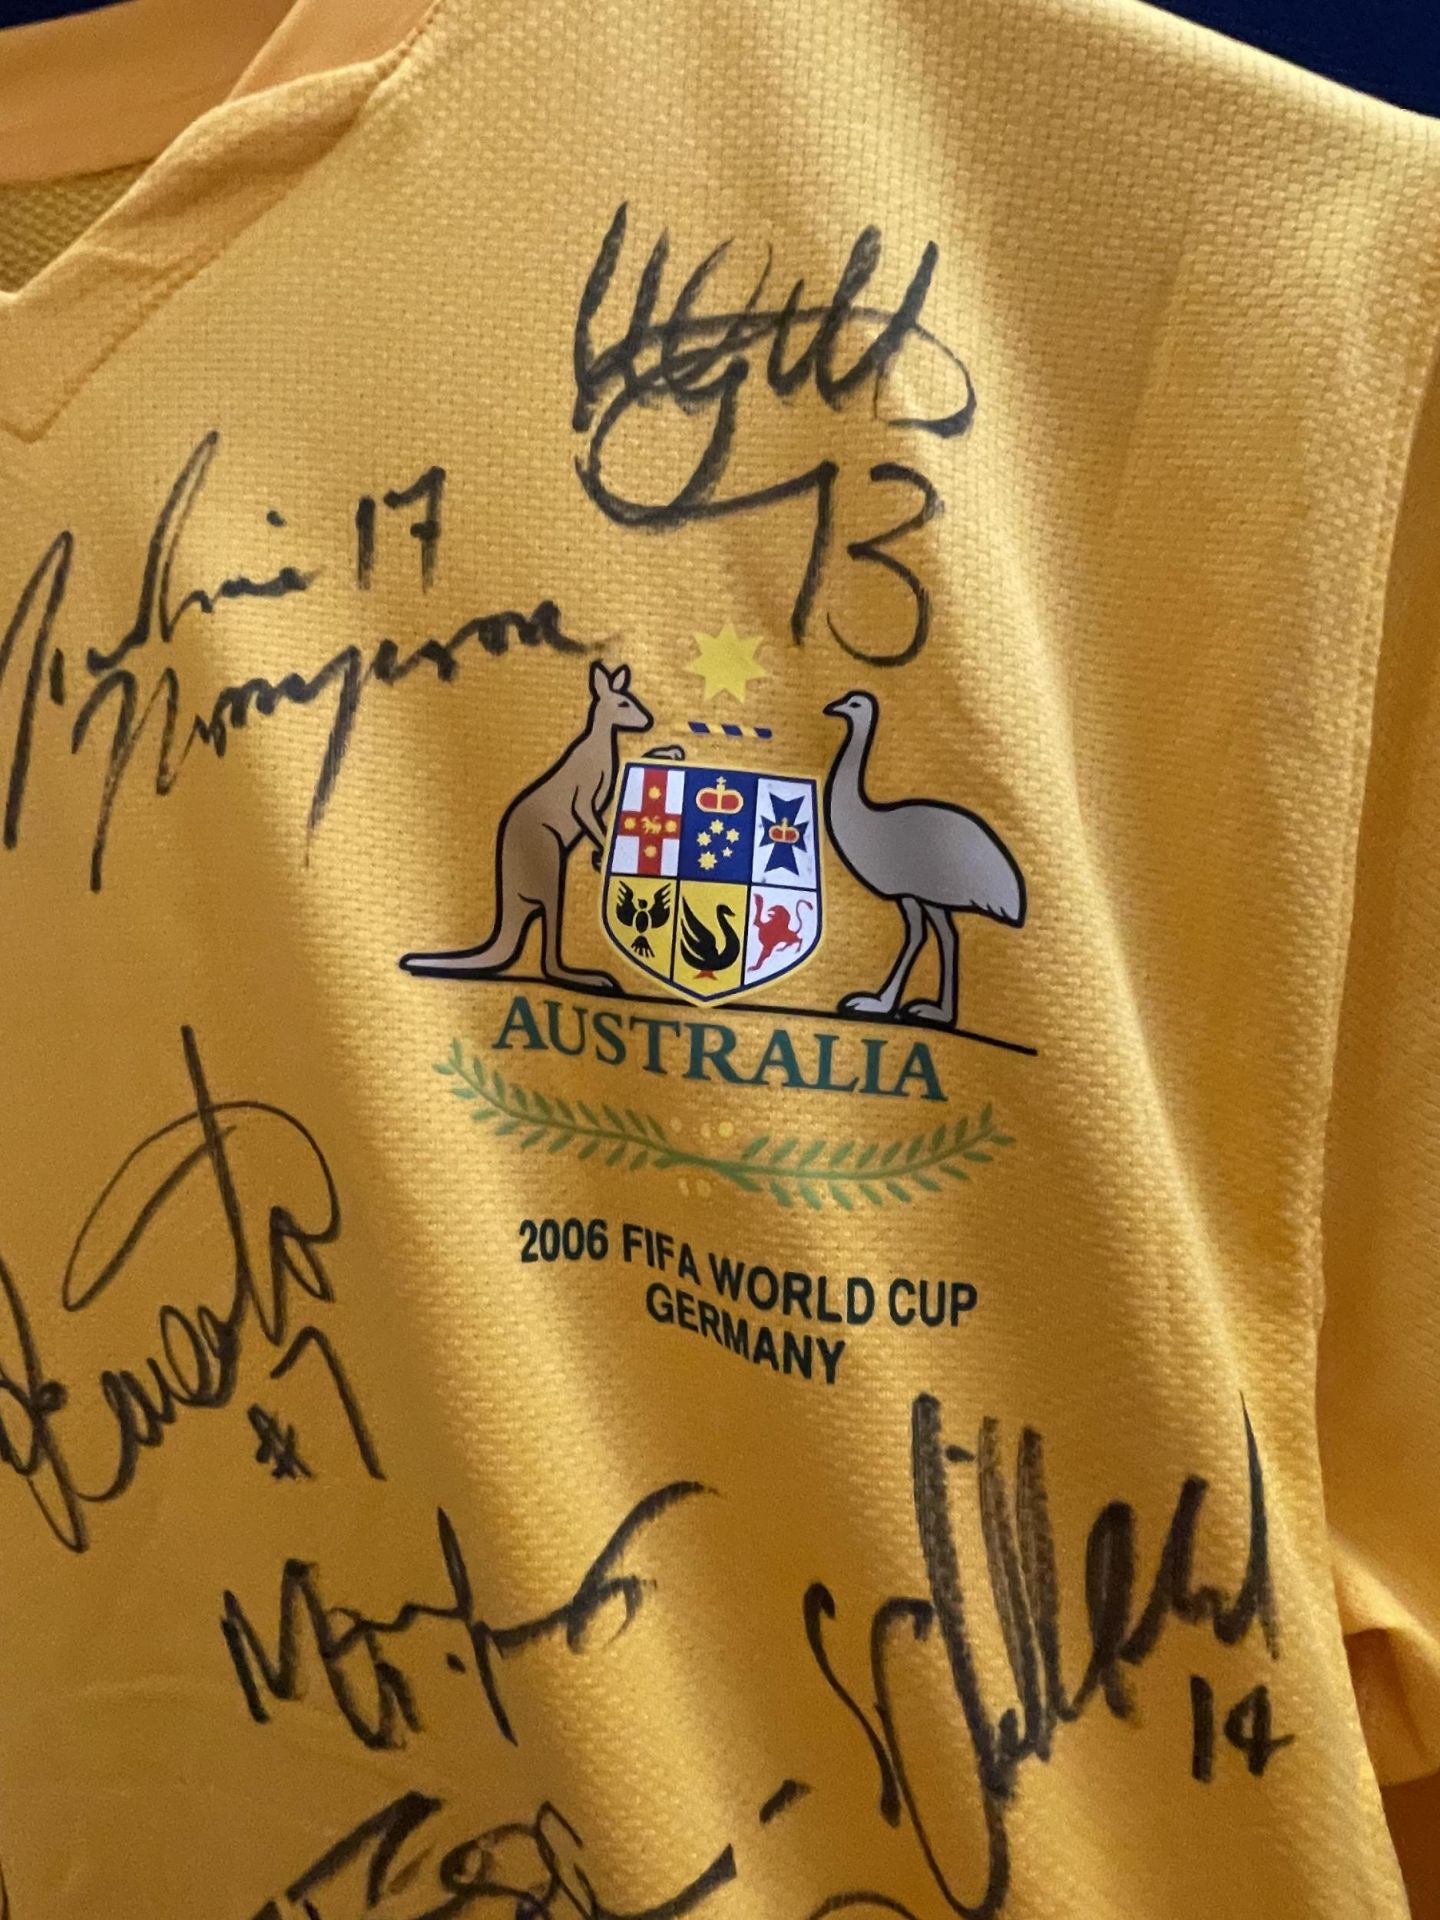 A SIGNED AUSTRALIAN FIFA 2006 WORLD CUP, GERMANY SHIRT - Image 4 of 7